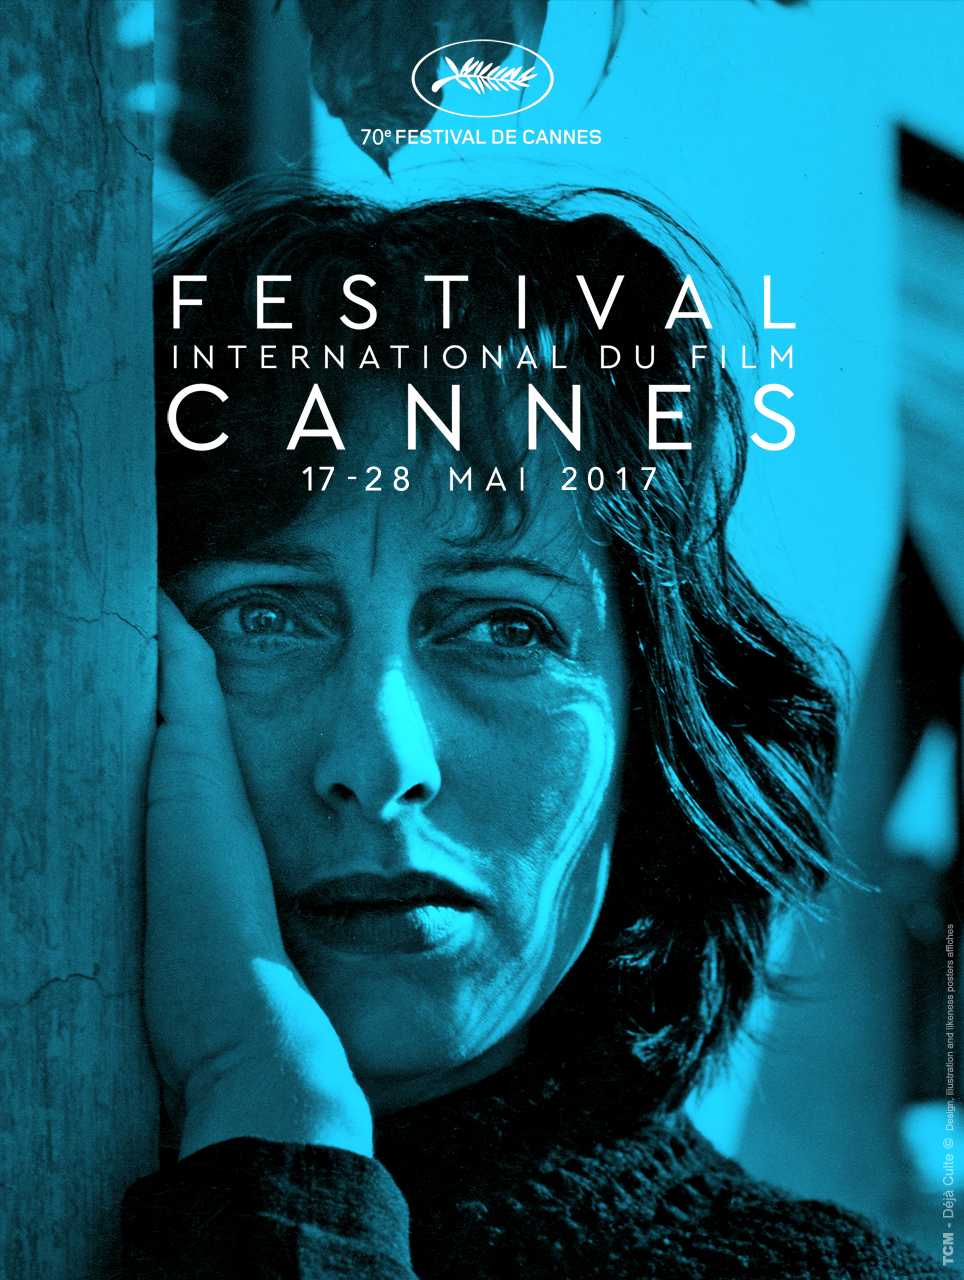 Cannes-2017-main-poster-2.jpg